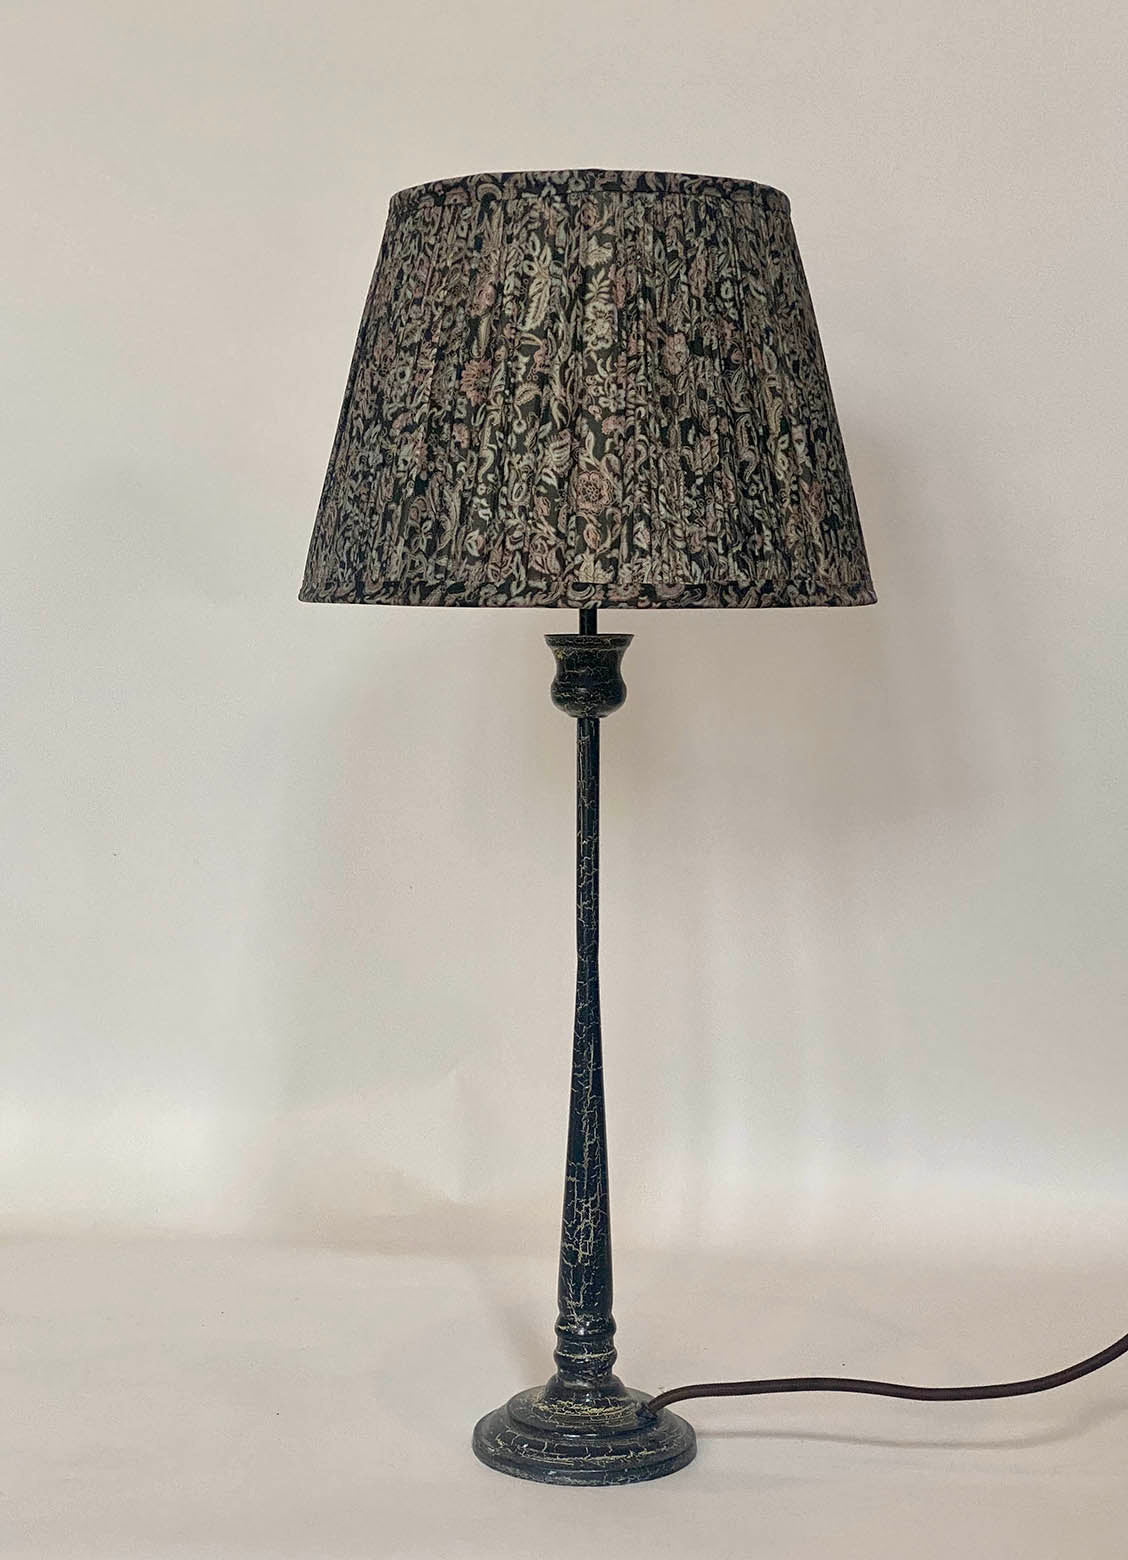 Black and Pale Blue vintage silk sari lampshade on a candlestick lampbase